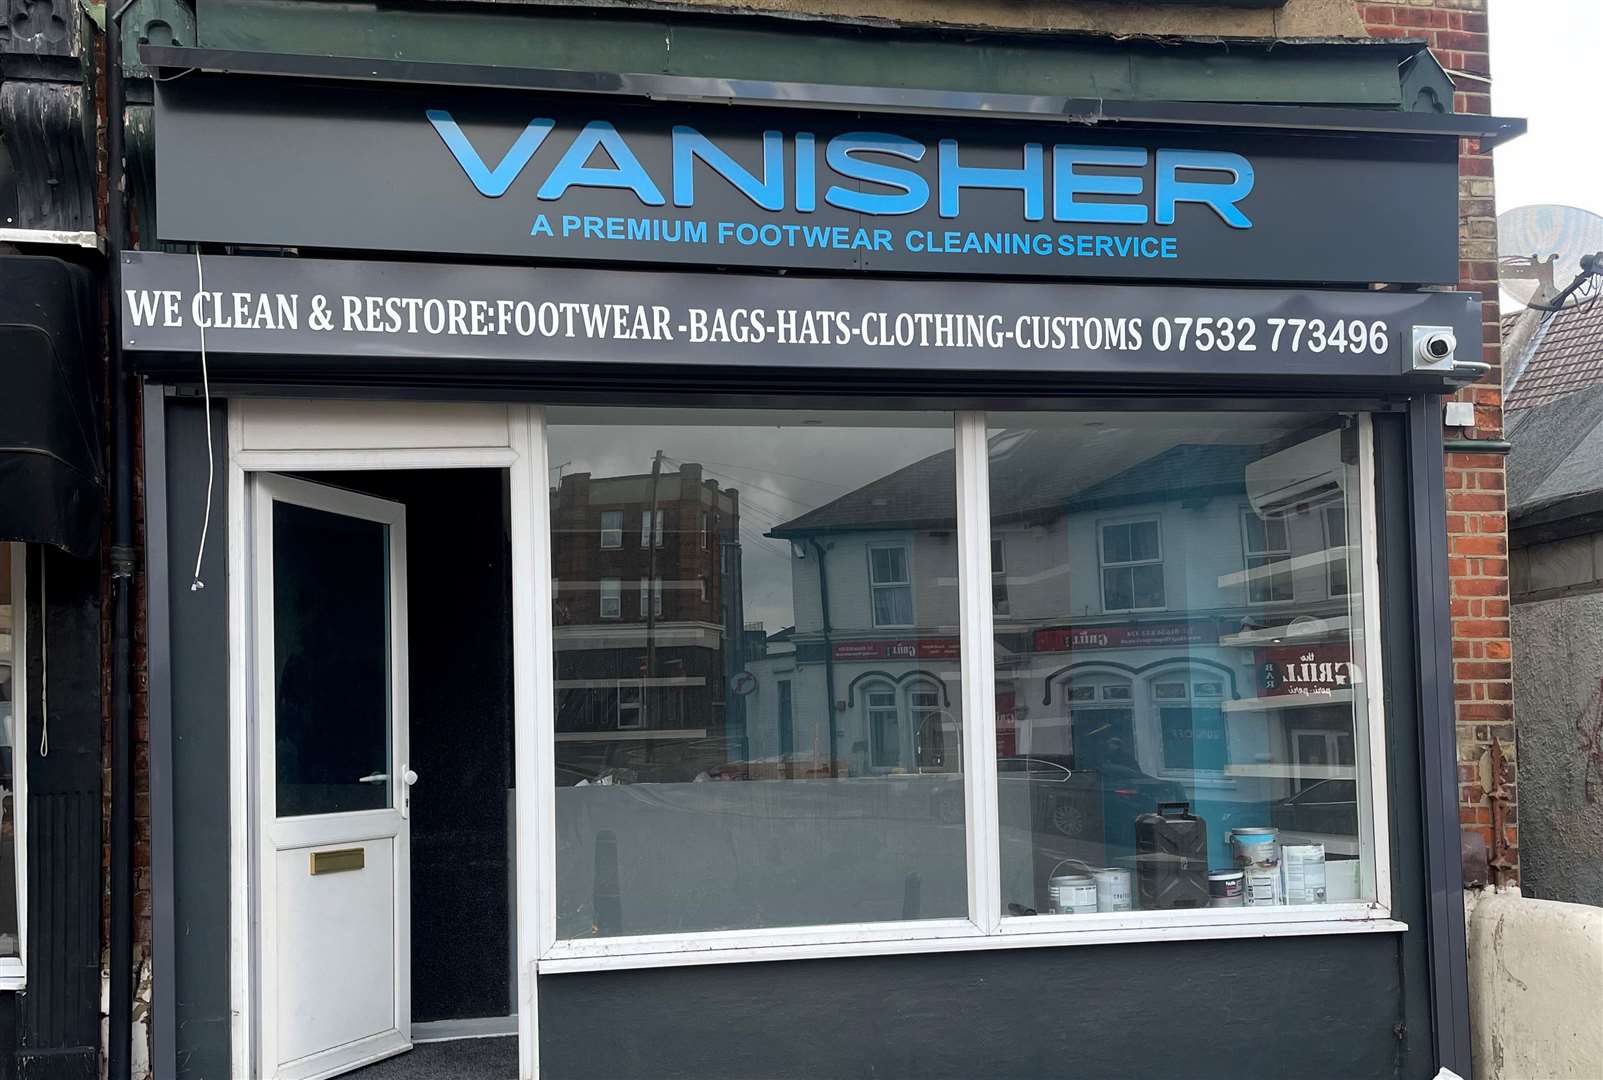 Vanisher will be opening in Gillingham Road on February 10